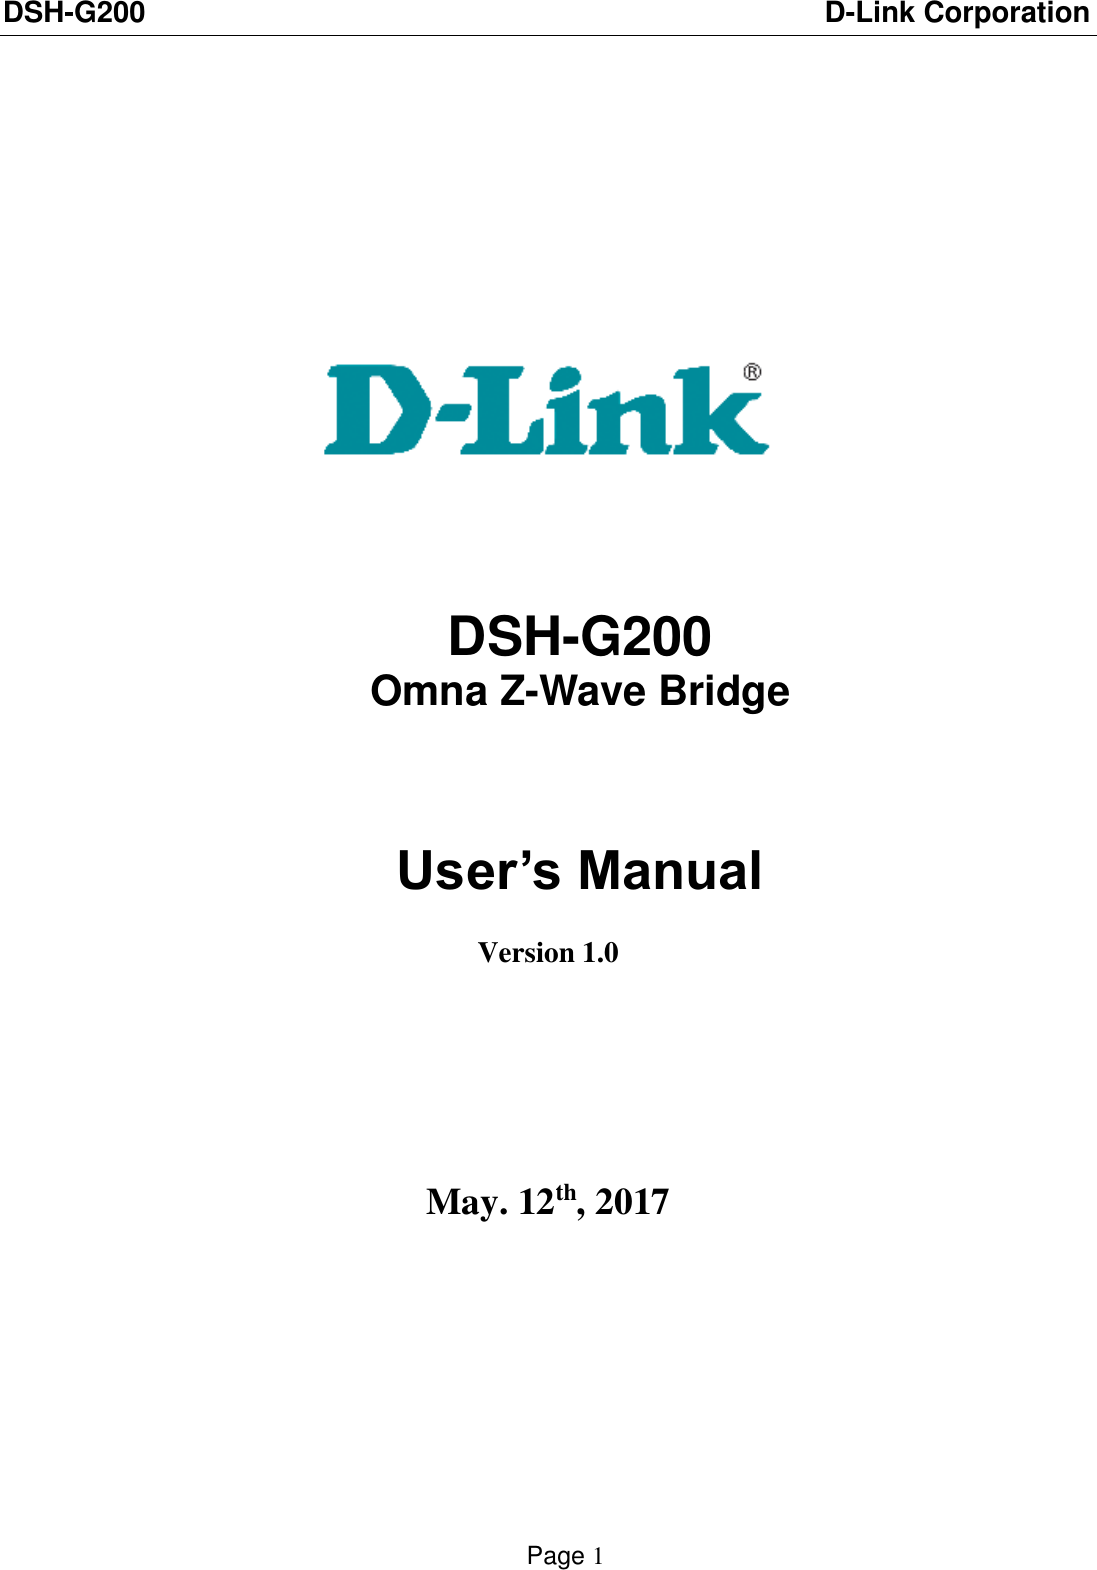 DSH-G200                          D-Link Corporation    Page 1                  DSH-G200  Omna Z-Wave Bridge   User’s Manual  Version 1.0     May. 12th, 2017         